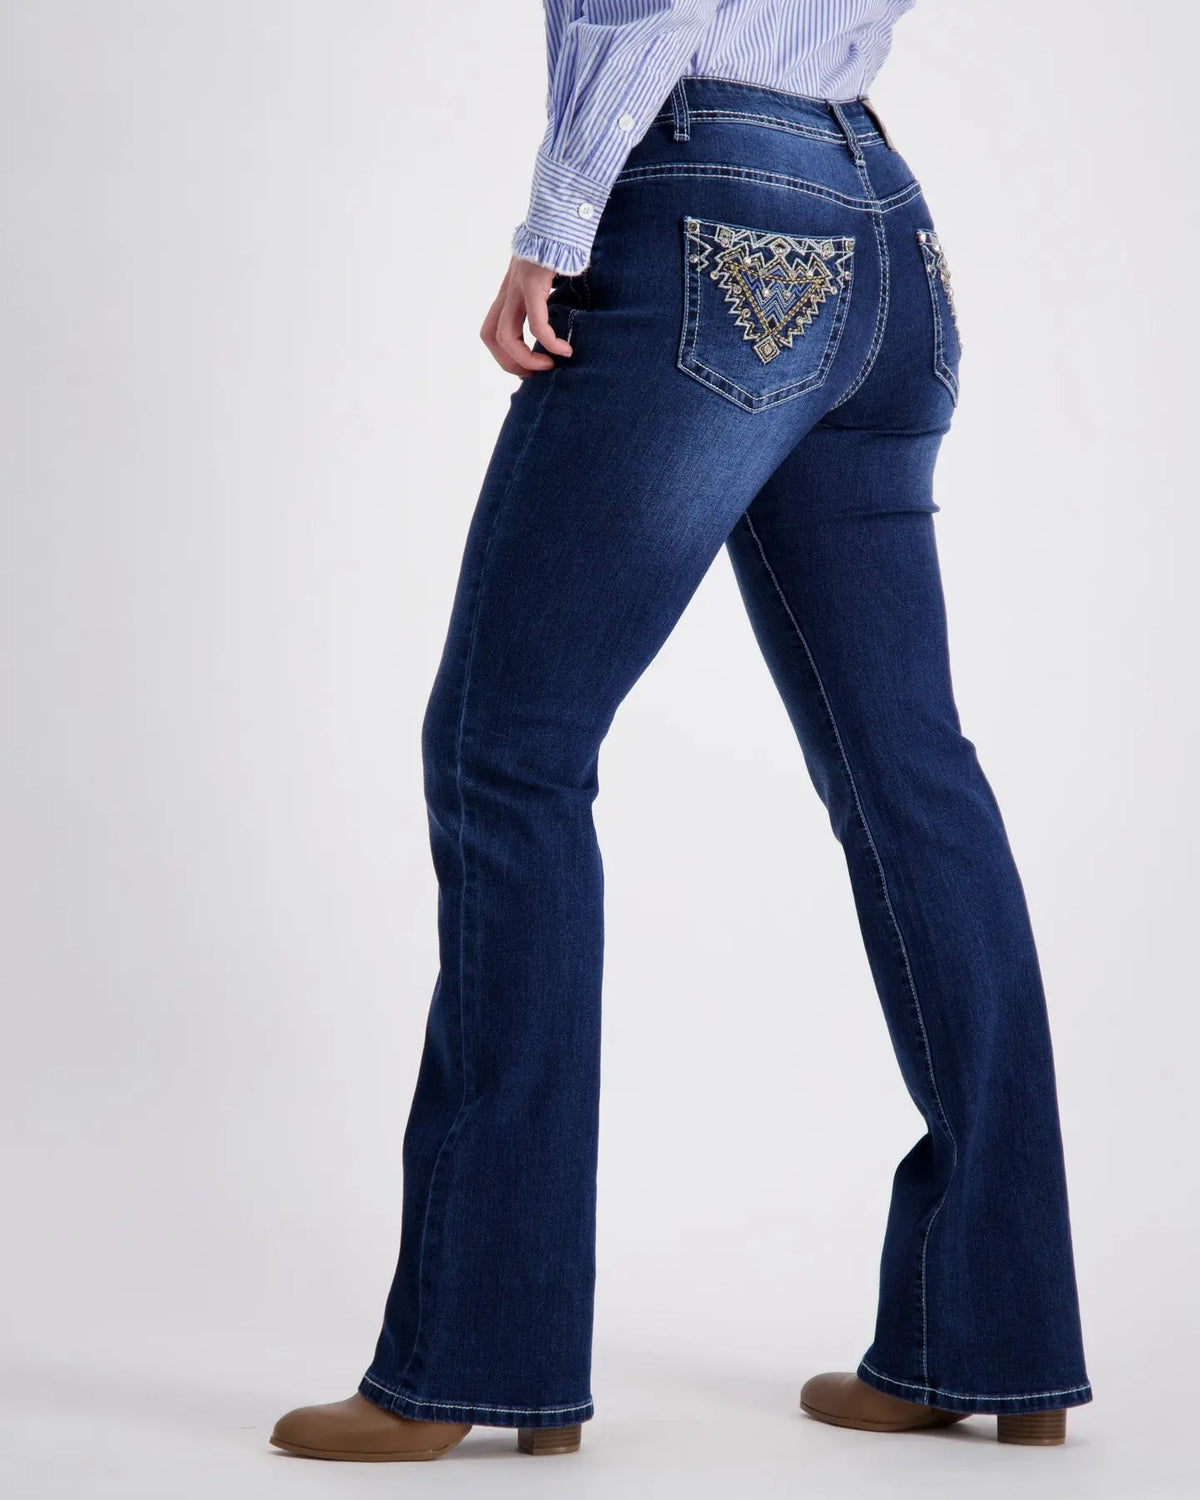 Cheyenne Boot-Cut Riding Jeans Outback Supply Co